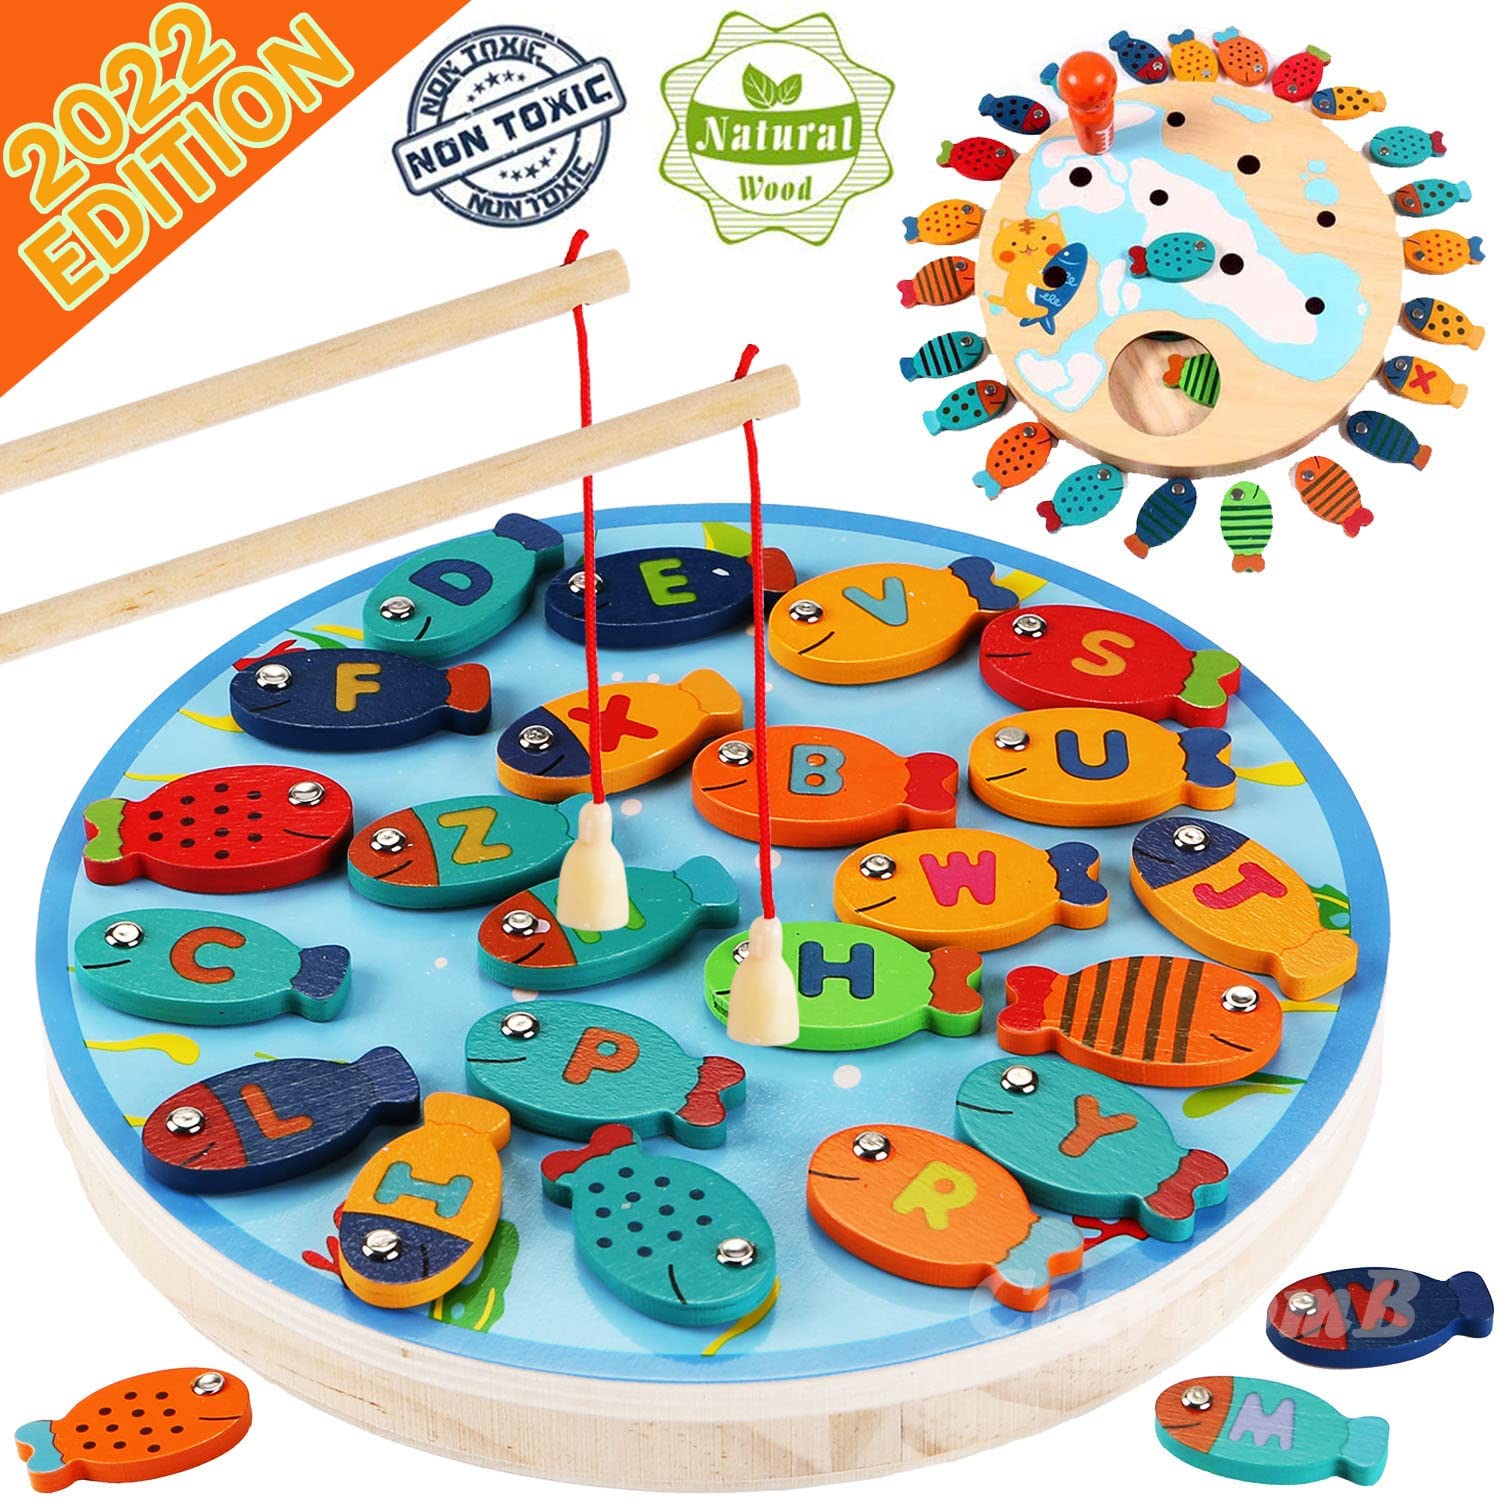 Magnetic Go Fishing – Games